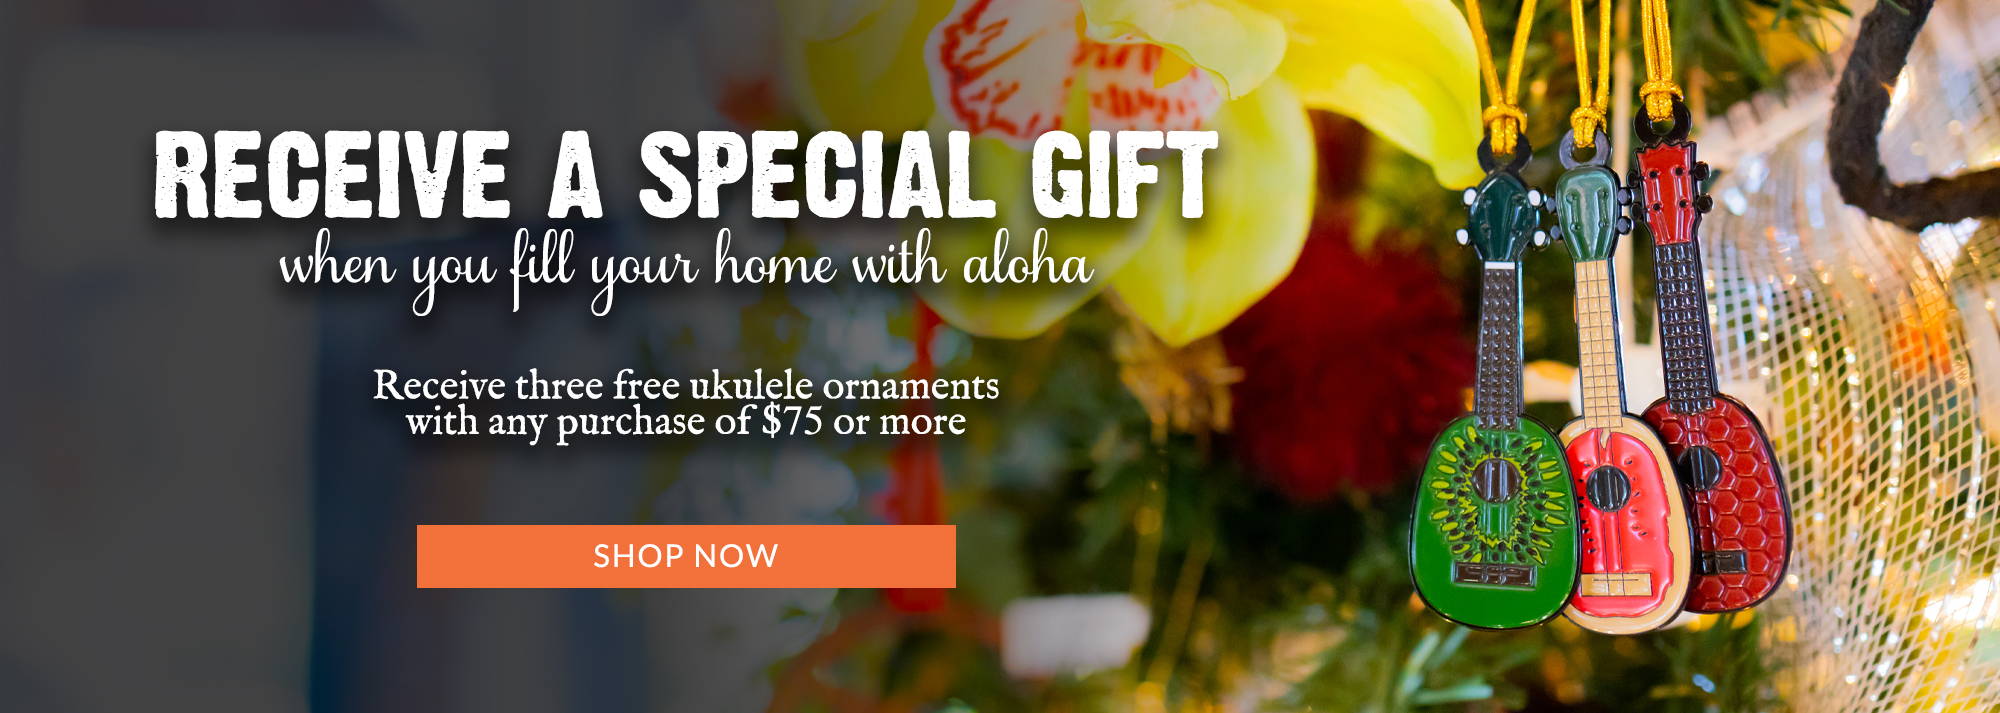 Receive a special gift when you fill your home with Aloha! Receive three free ukulele ornaments with any purchase of $75 total or more